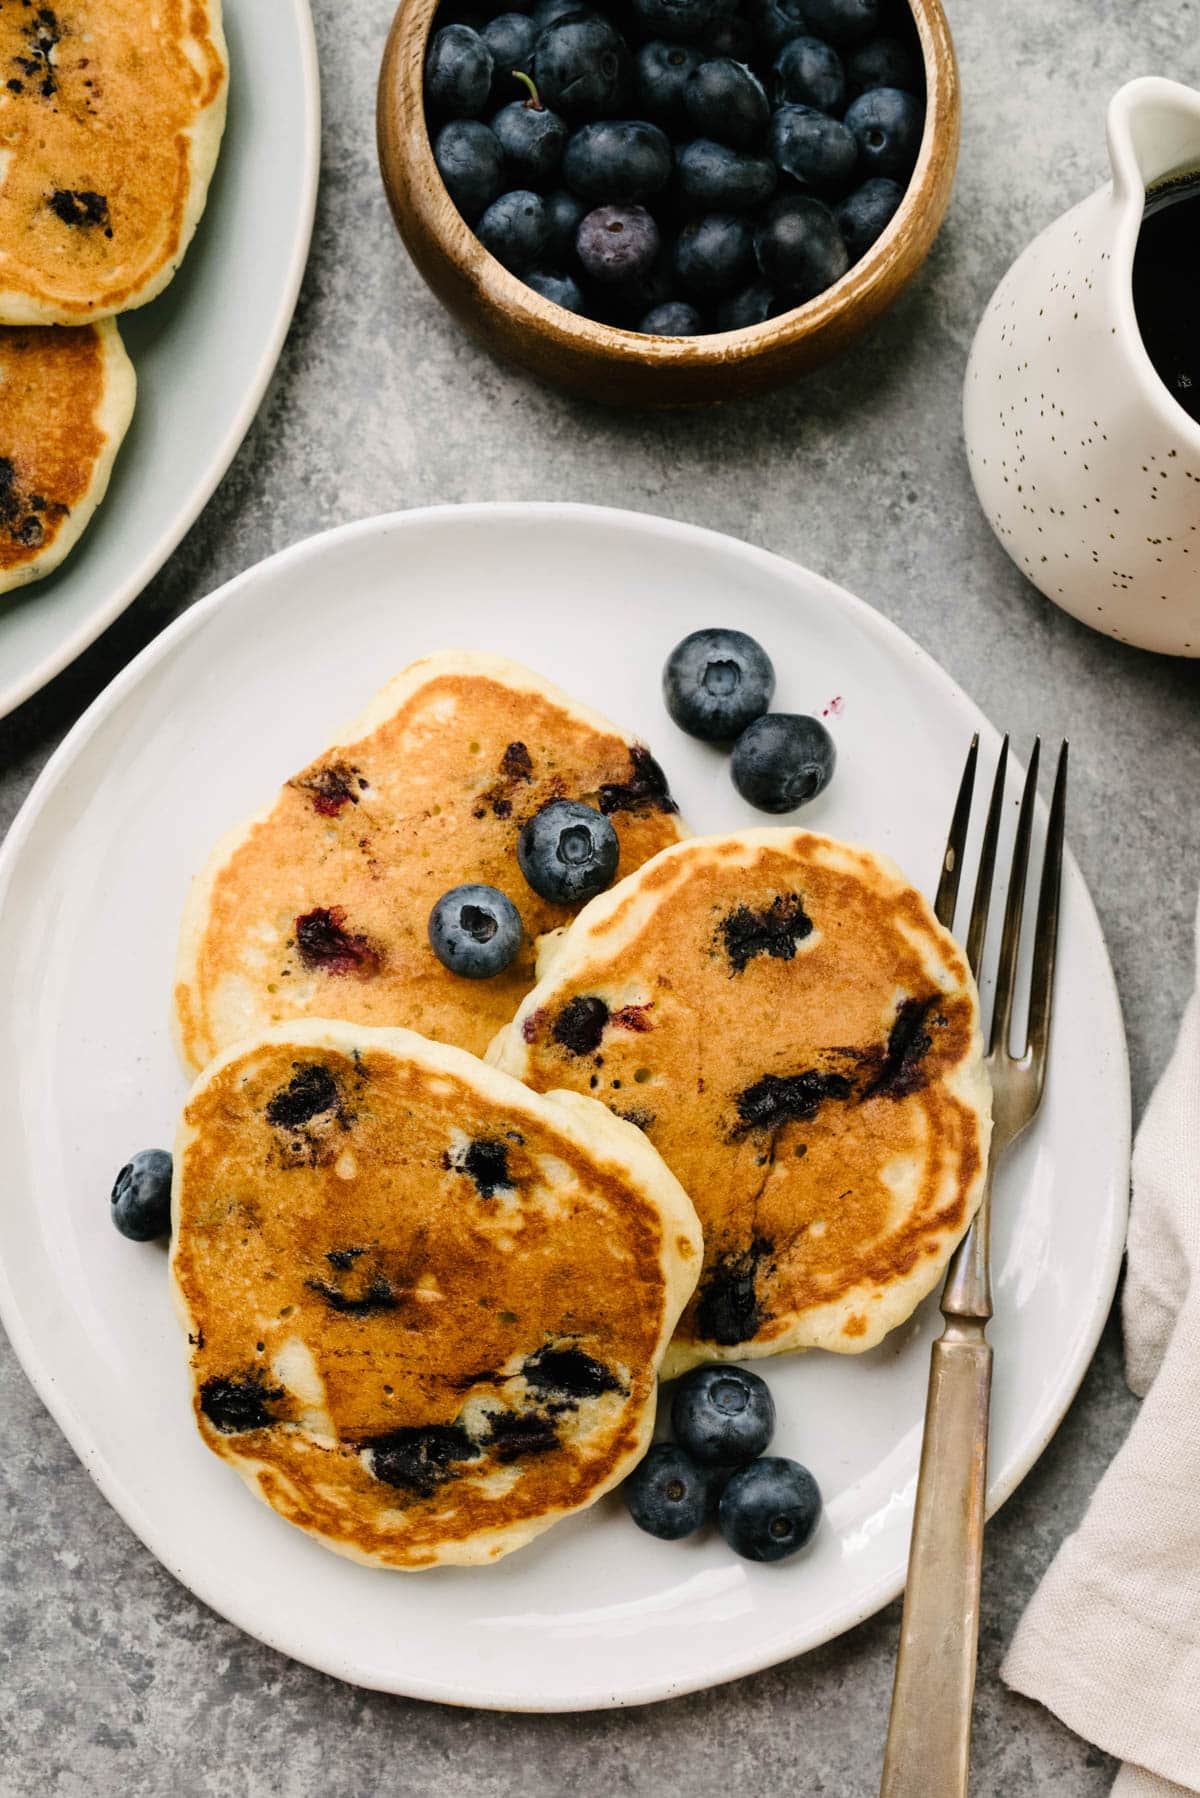 Three blueberry pancakes with buttermilk on a white plate with a silver fork and additional fresh blueberries; plate is surrounded by a cream linen napkin, small pitcher of maple syrup, and a bowl of blueberries.